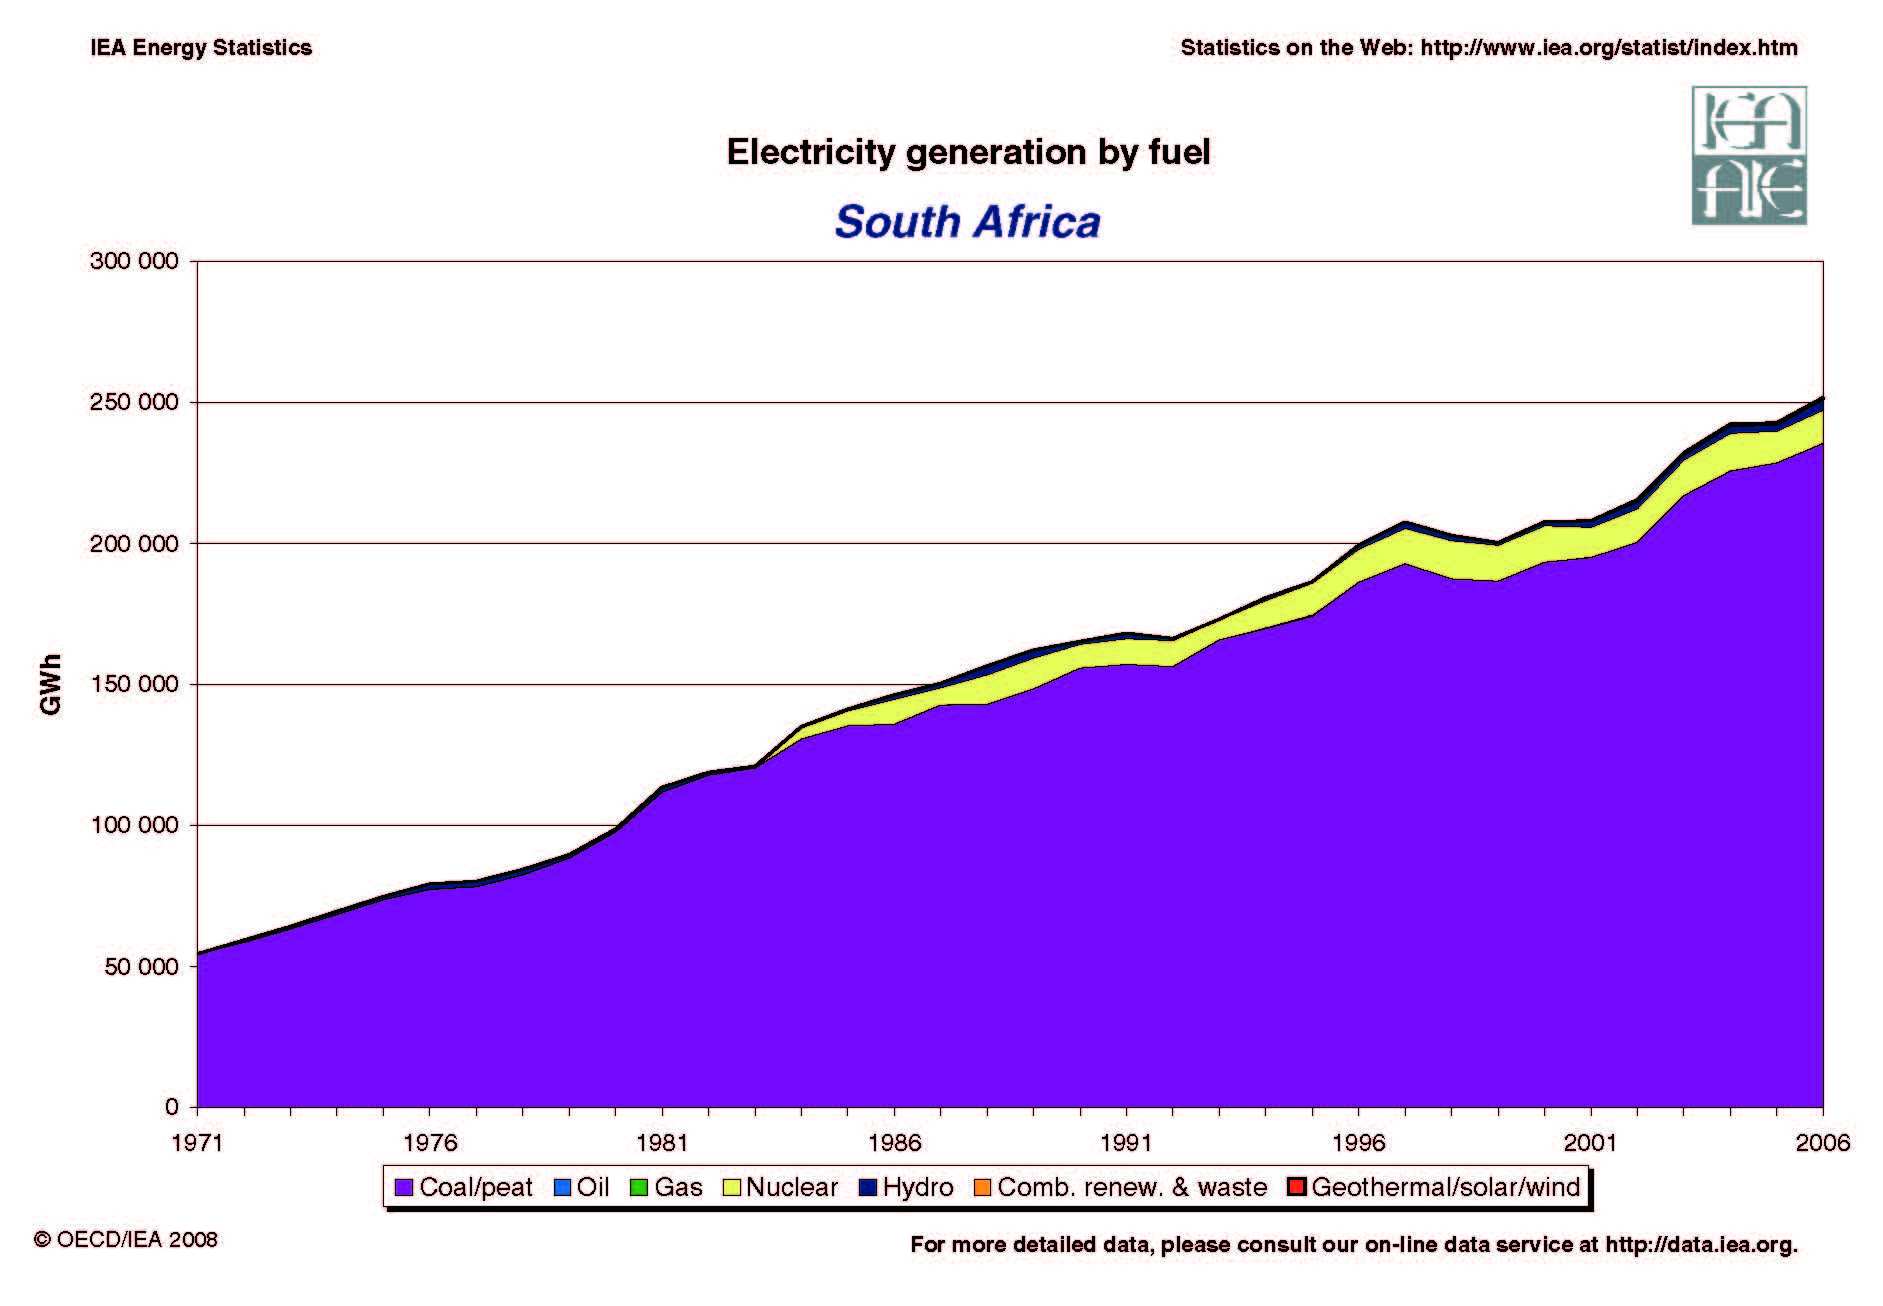 electricity generation by fuel - South Africa